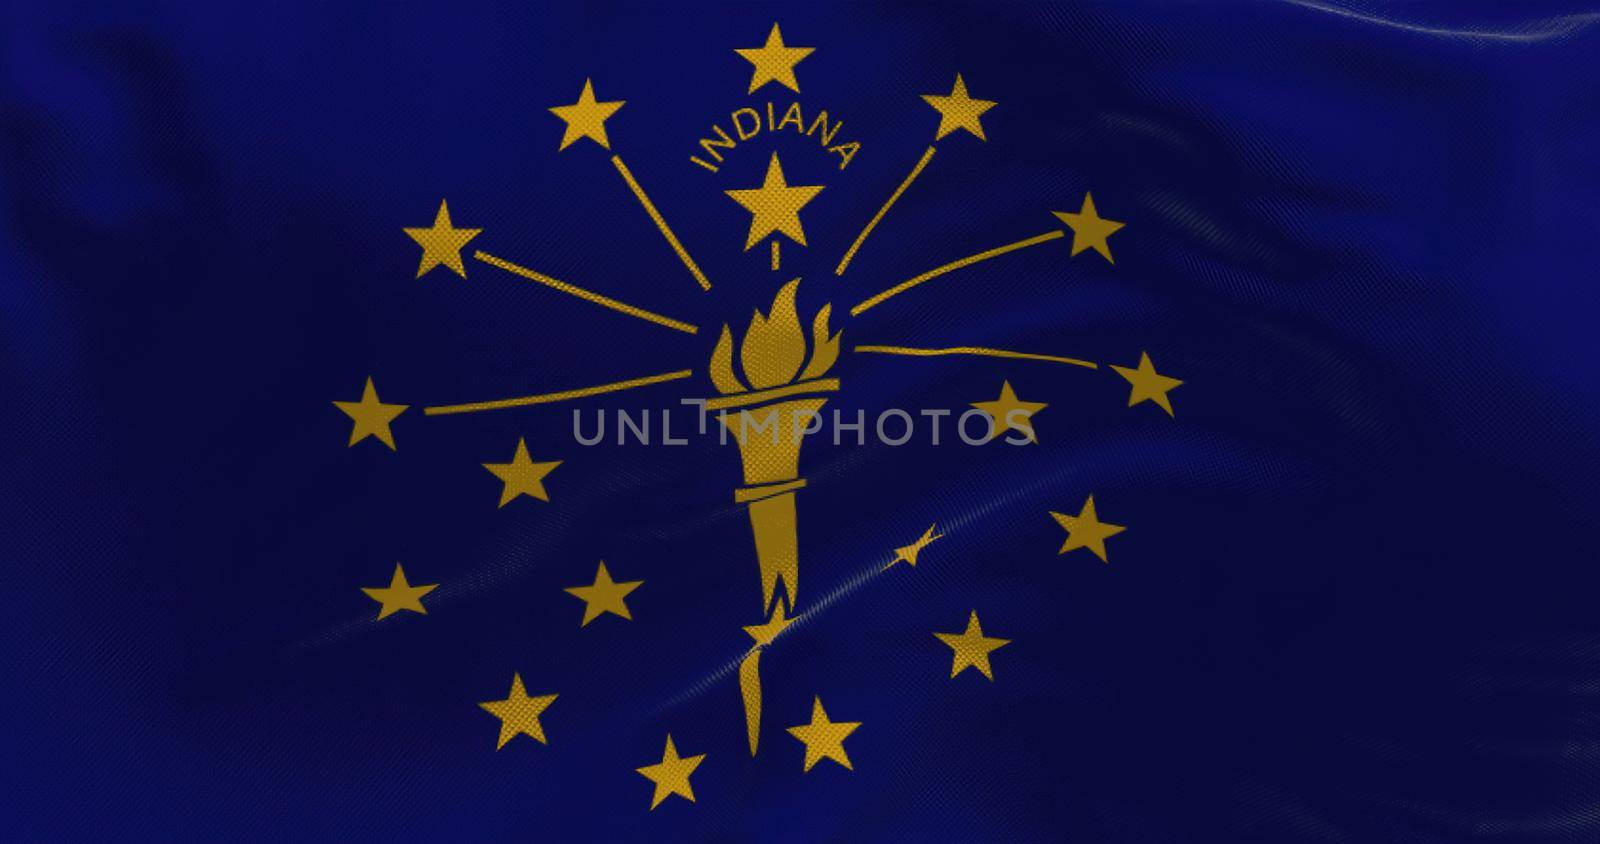 The US state flag of Indiana waving in the wind by rarrarorro